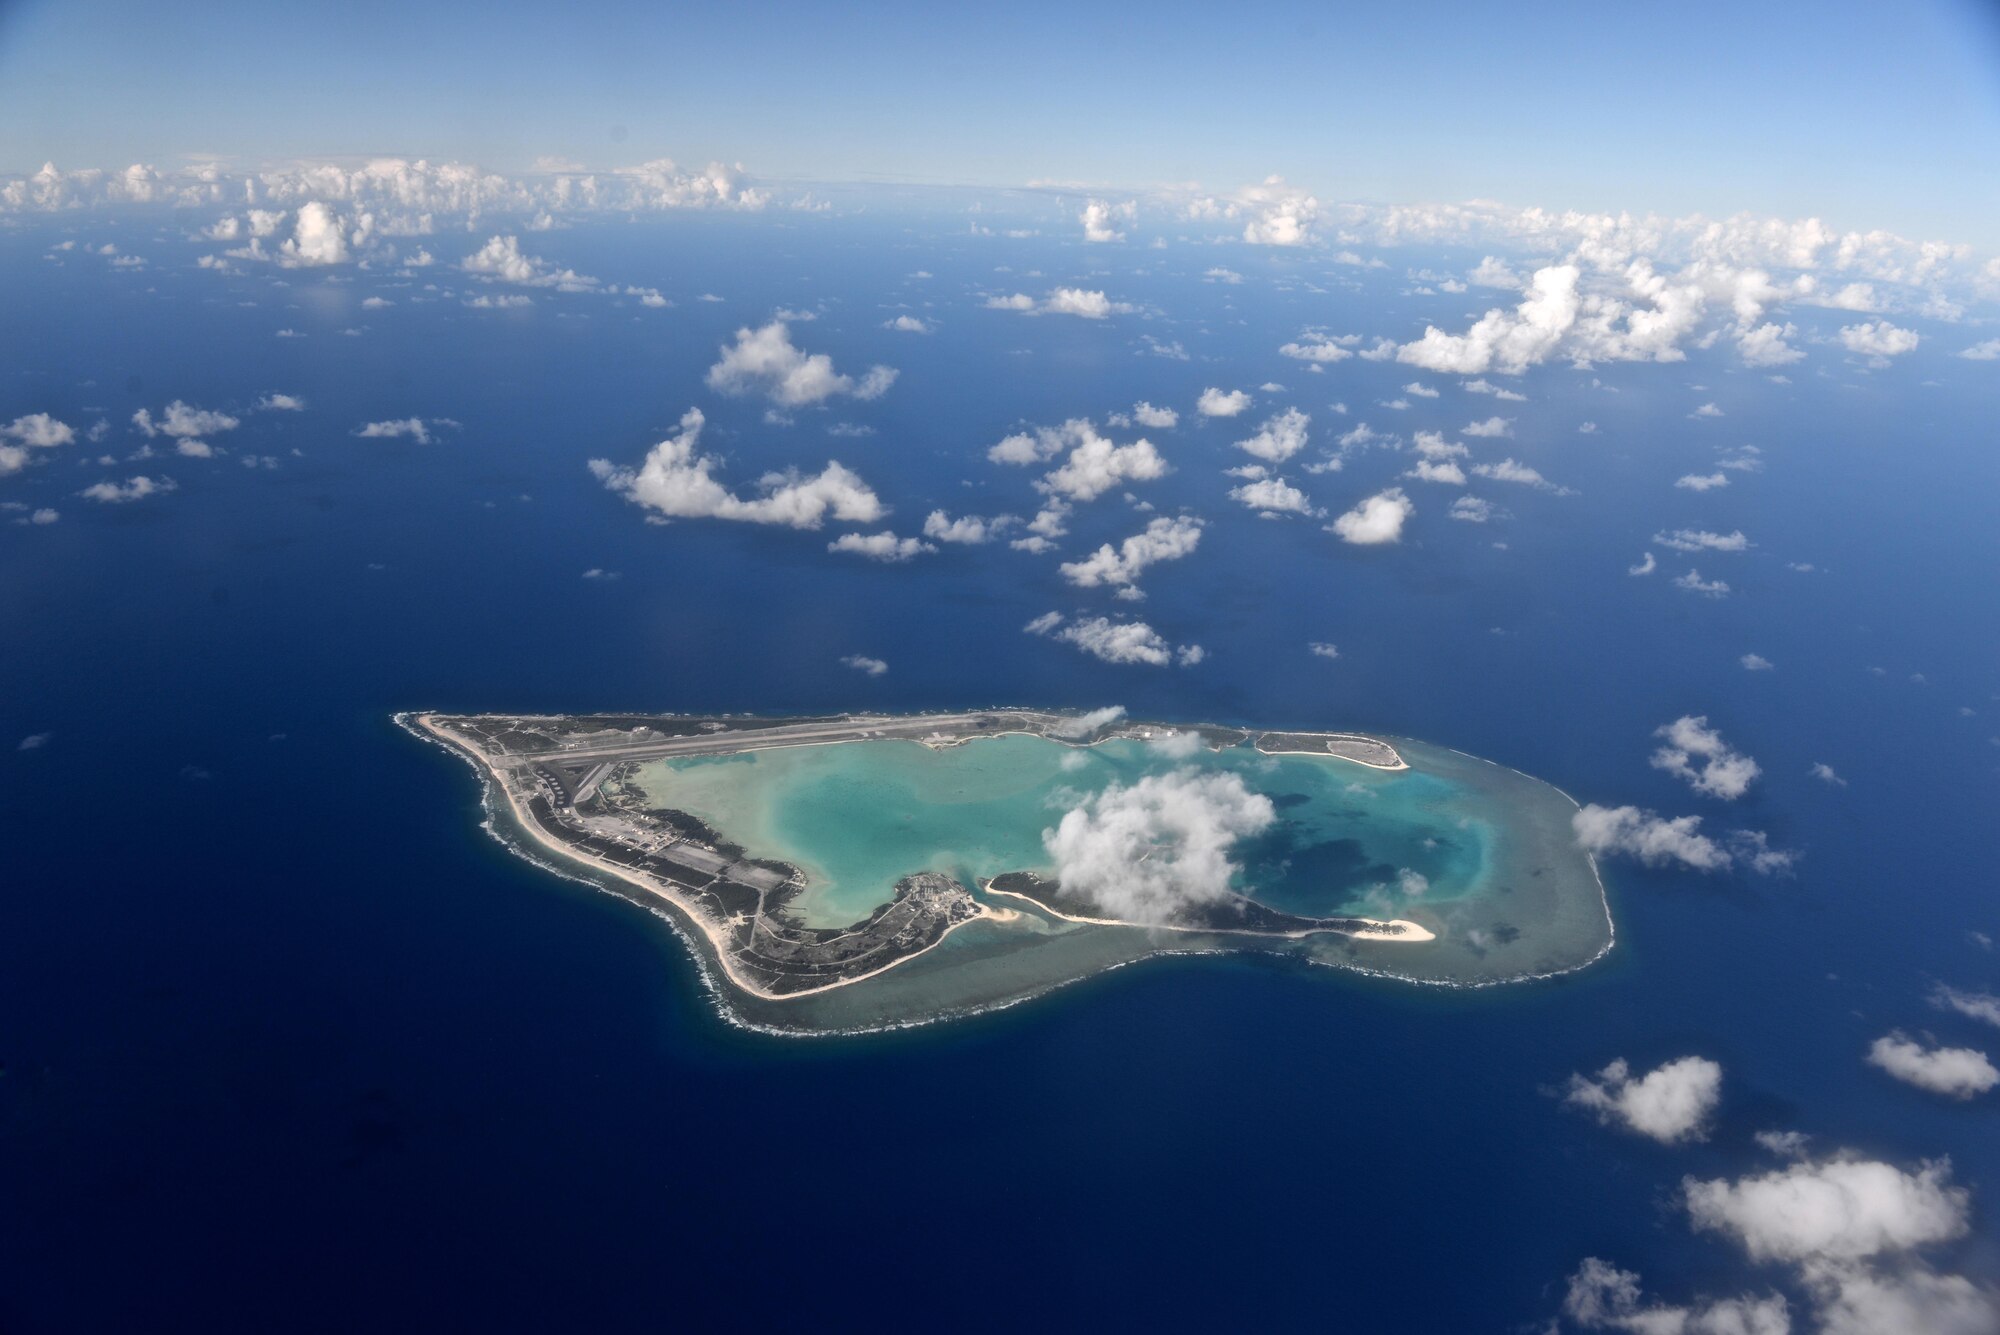 Wake Island, pictured as viewed from the north, was completely evacuated July 15, 2015, in preparation for Typhoon Halola closing in on the small atoll. A team with the 36th Contingency Response Group deployed from Andersen Air Force Base, Guam, to the atoll July 20, 2015, to assist permanently assigned airfield staff in storm recovery efforts. (U.S. Air Force photo/Senior Airman Alexander W. Riedel)